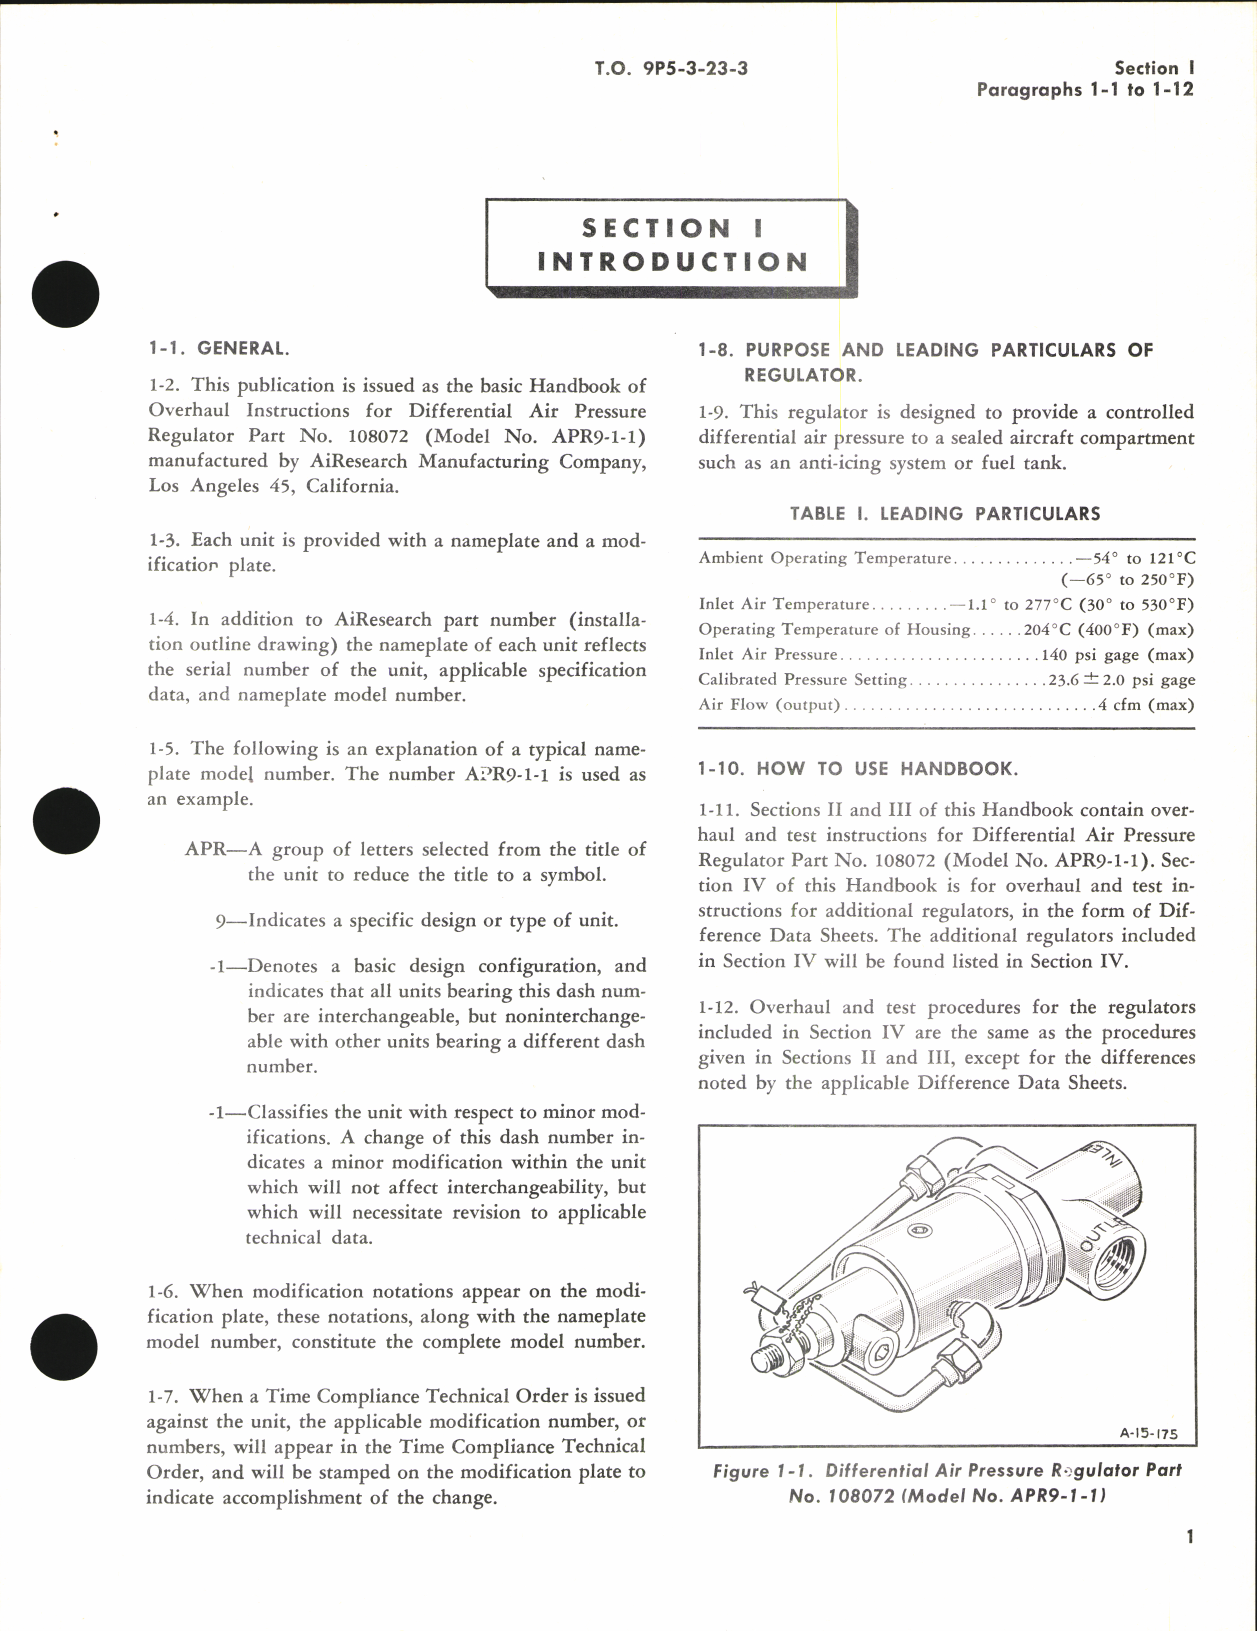 Sample page 5 from AirCorps Library document: Handbook of Overhaul Instructions for Air Pressure Regulators 